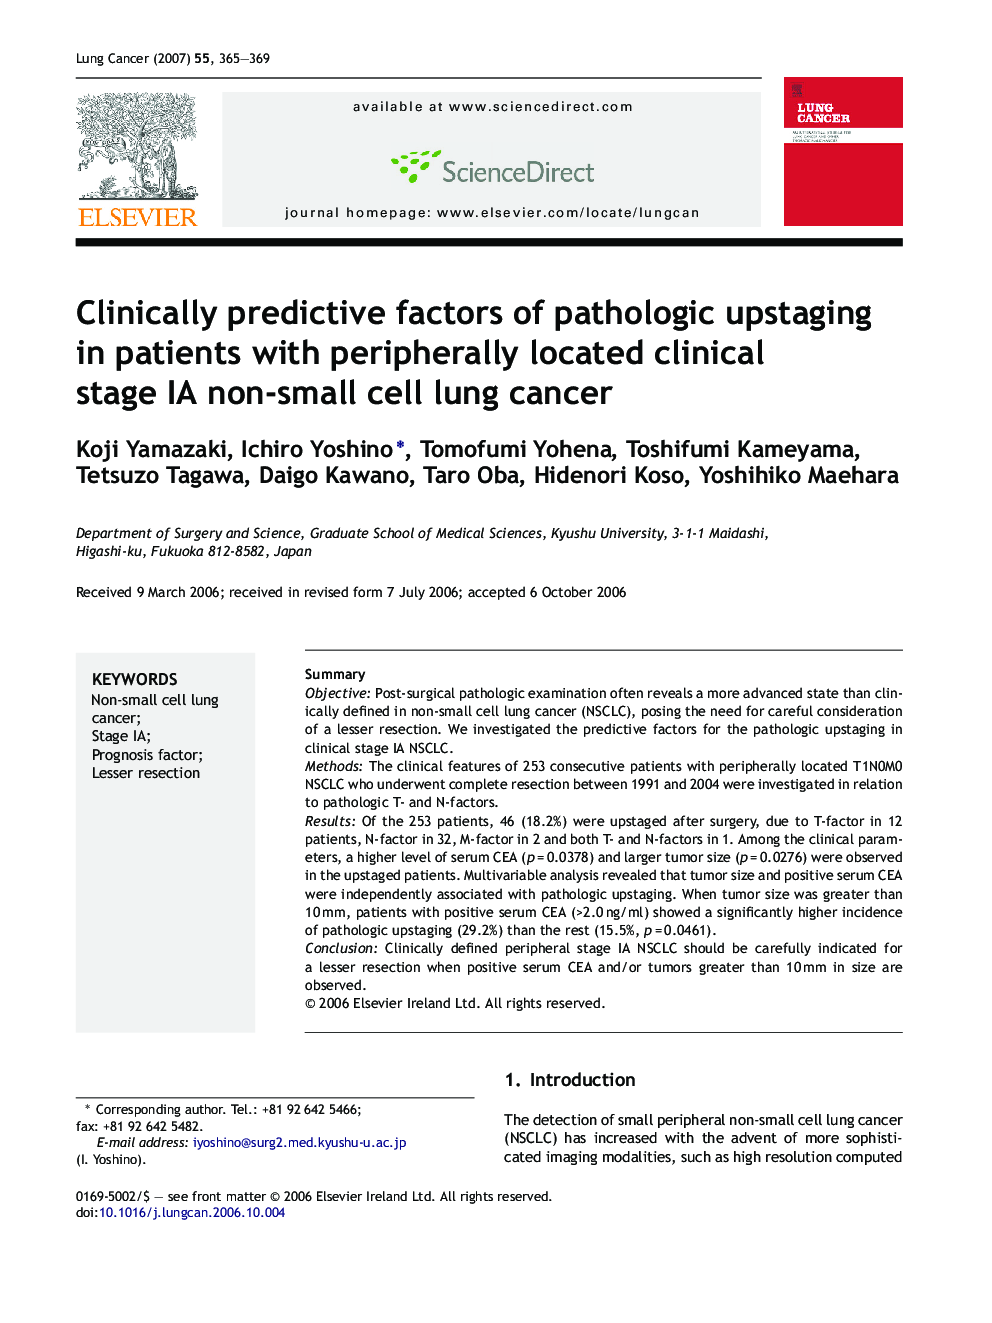 Clinically predictive factors of pathologic upstaging in patients with peripherally located clinical stage IA non-small cell lung cancer